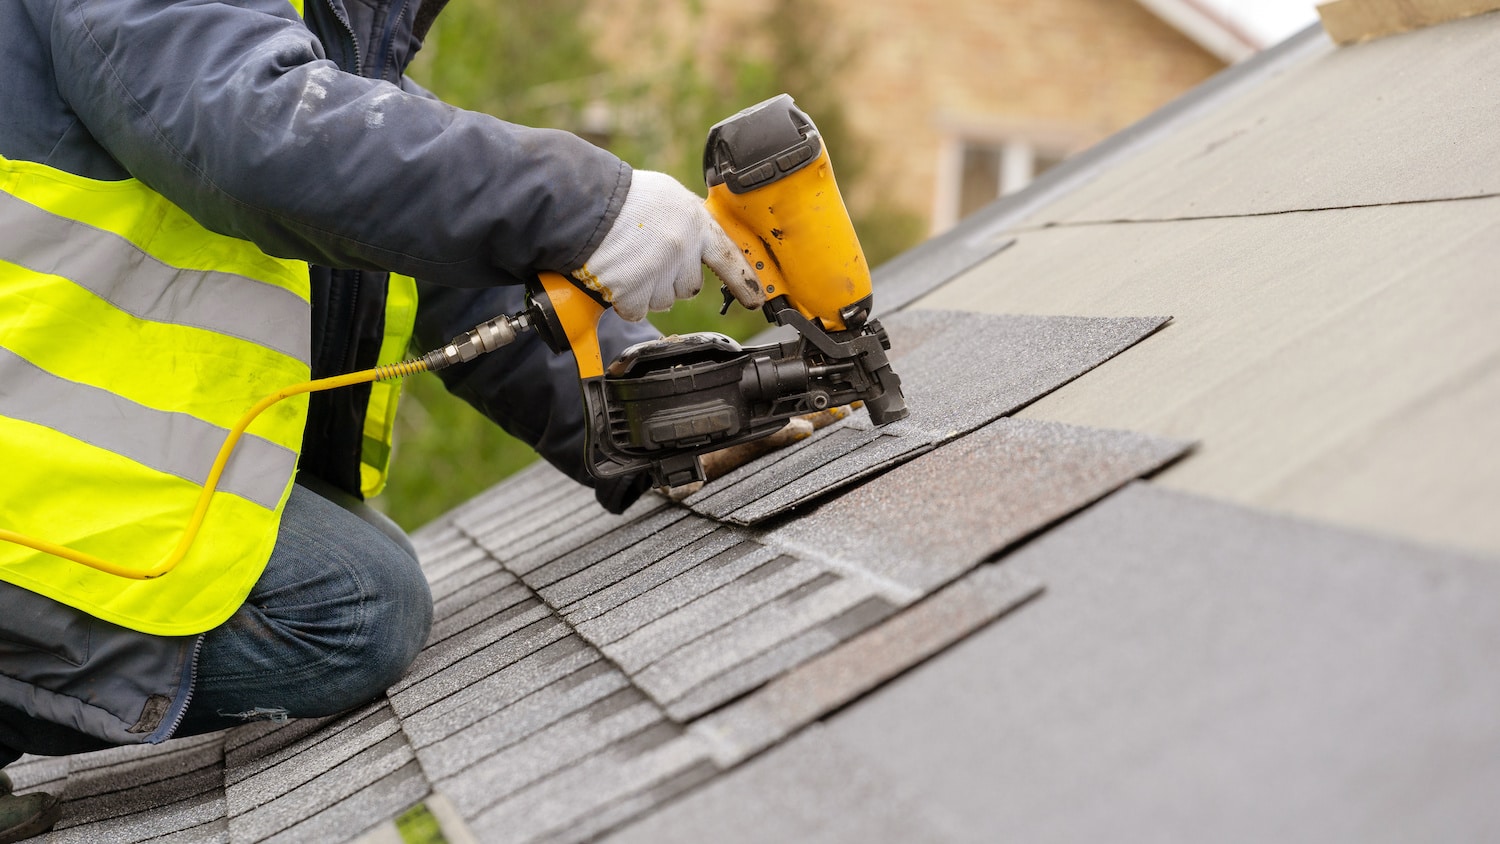 roof repair worker completing shingle replacement with roofing nail gun